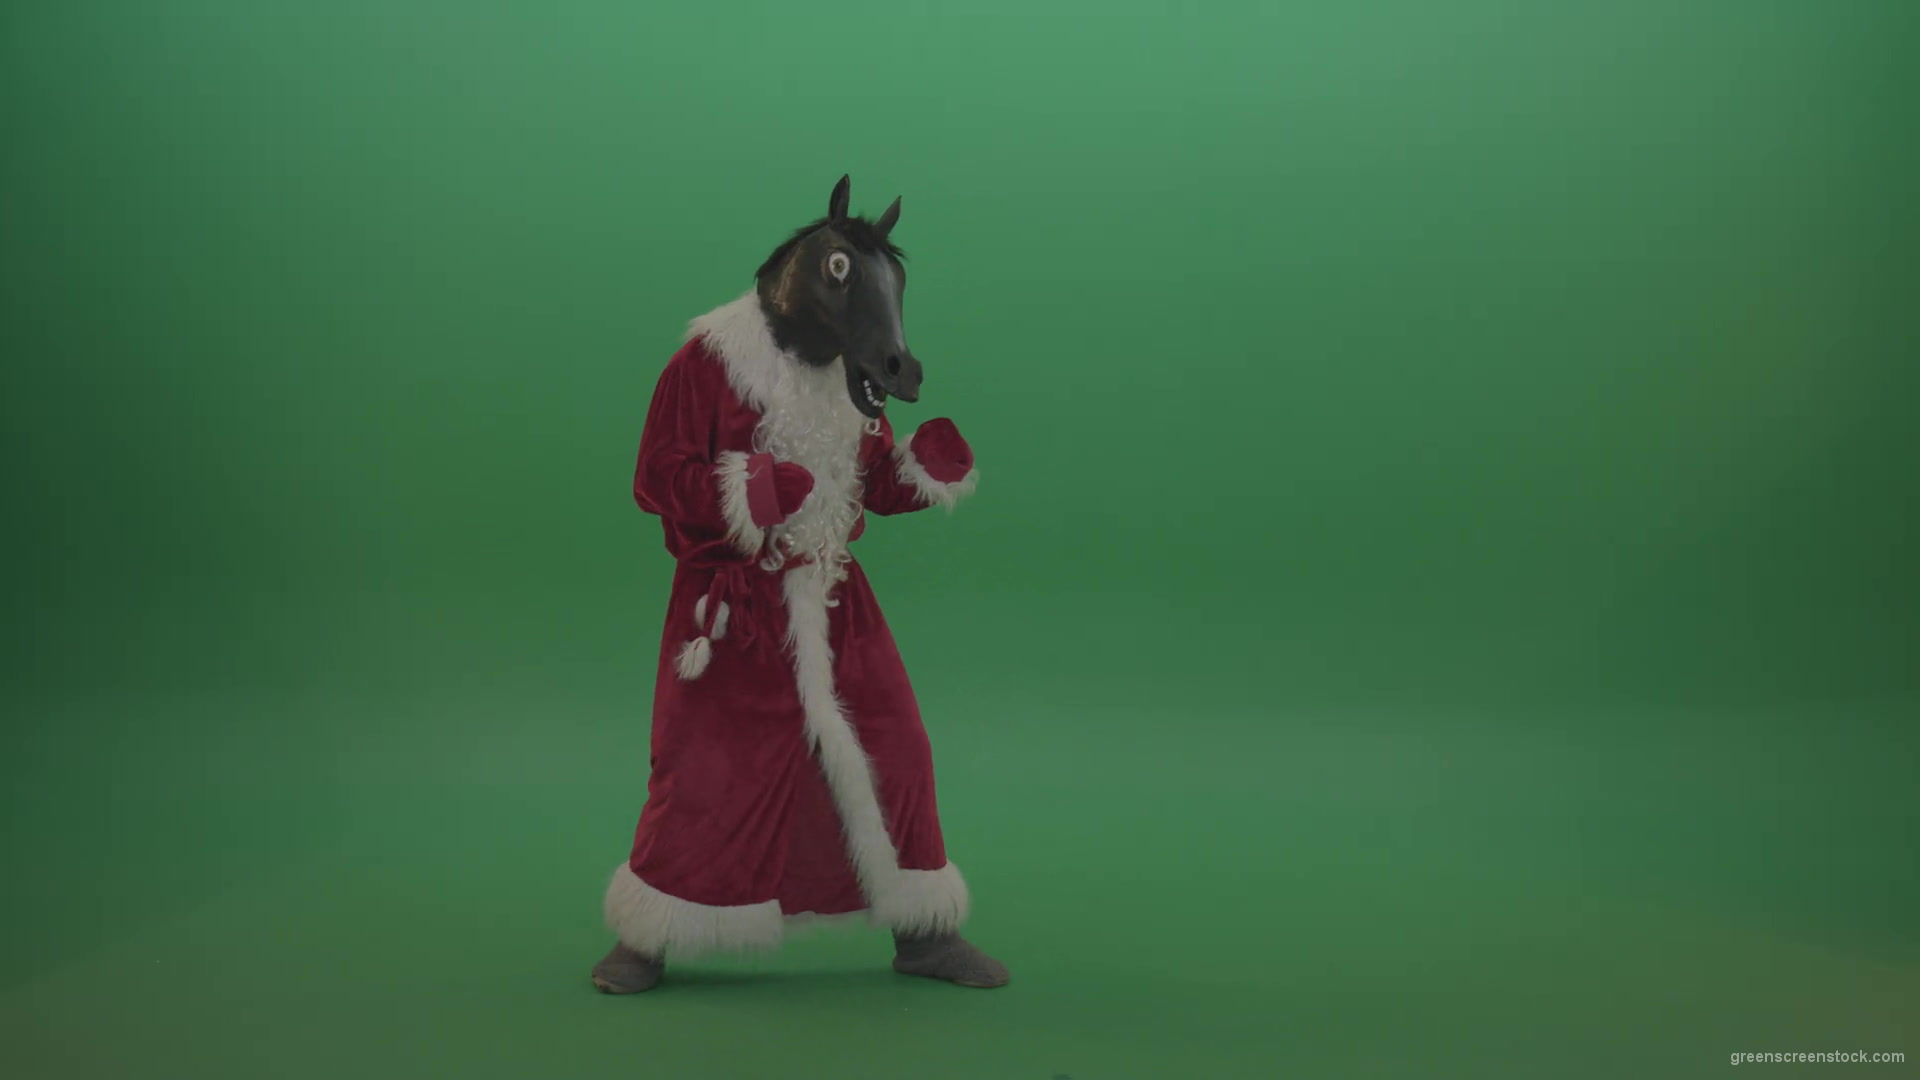 Horse-head-santa-displays-his-fight-techniques-over-chromakey-background-1920_002 Green Screen Stock